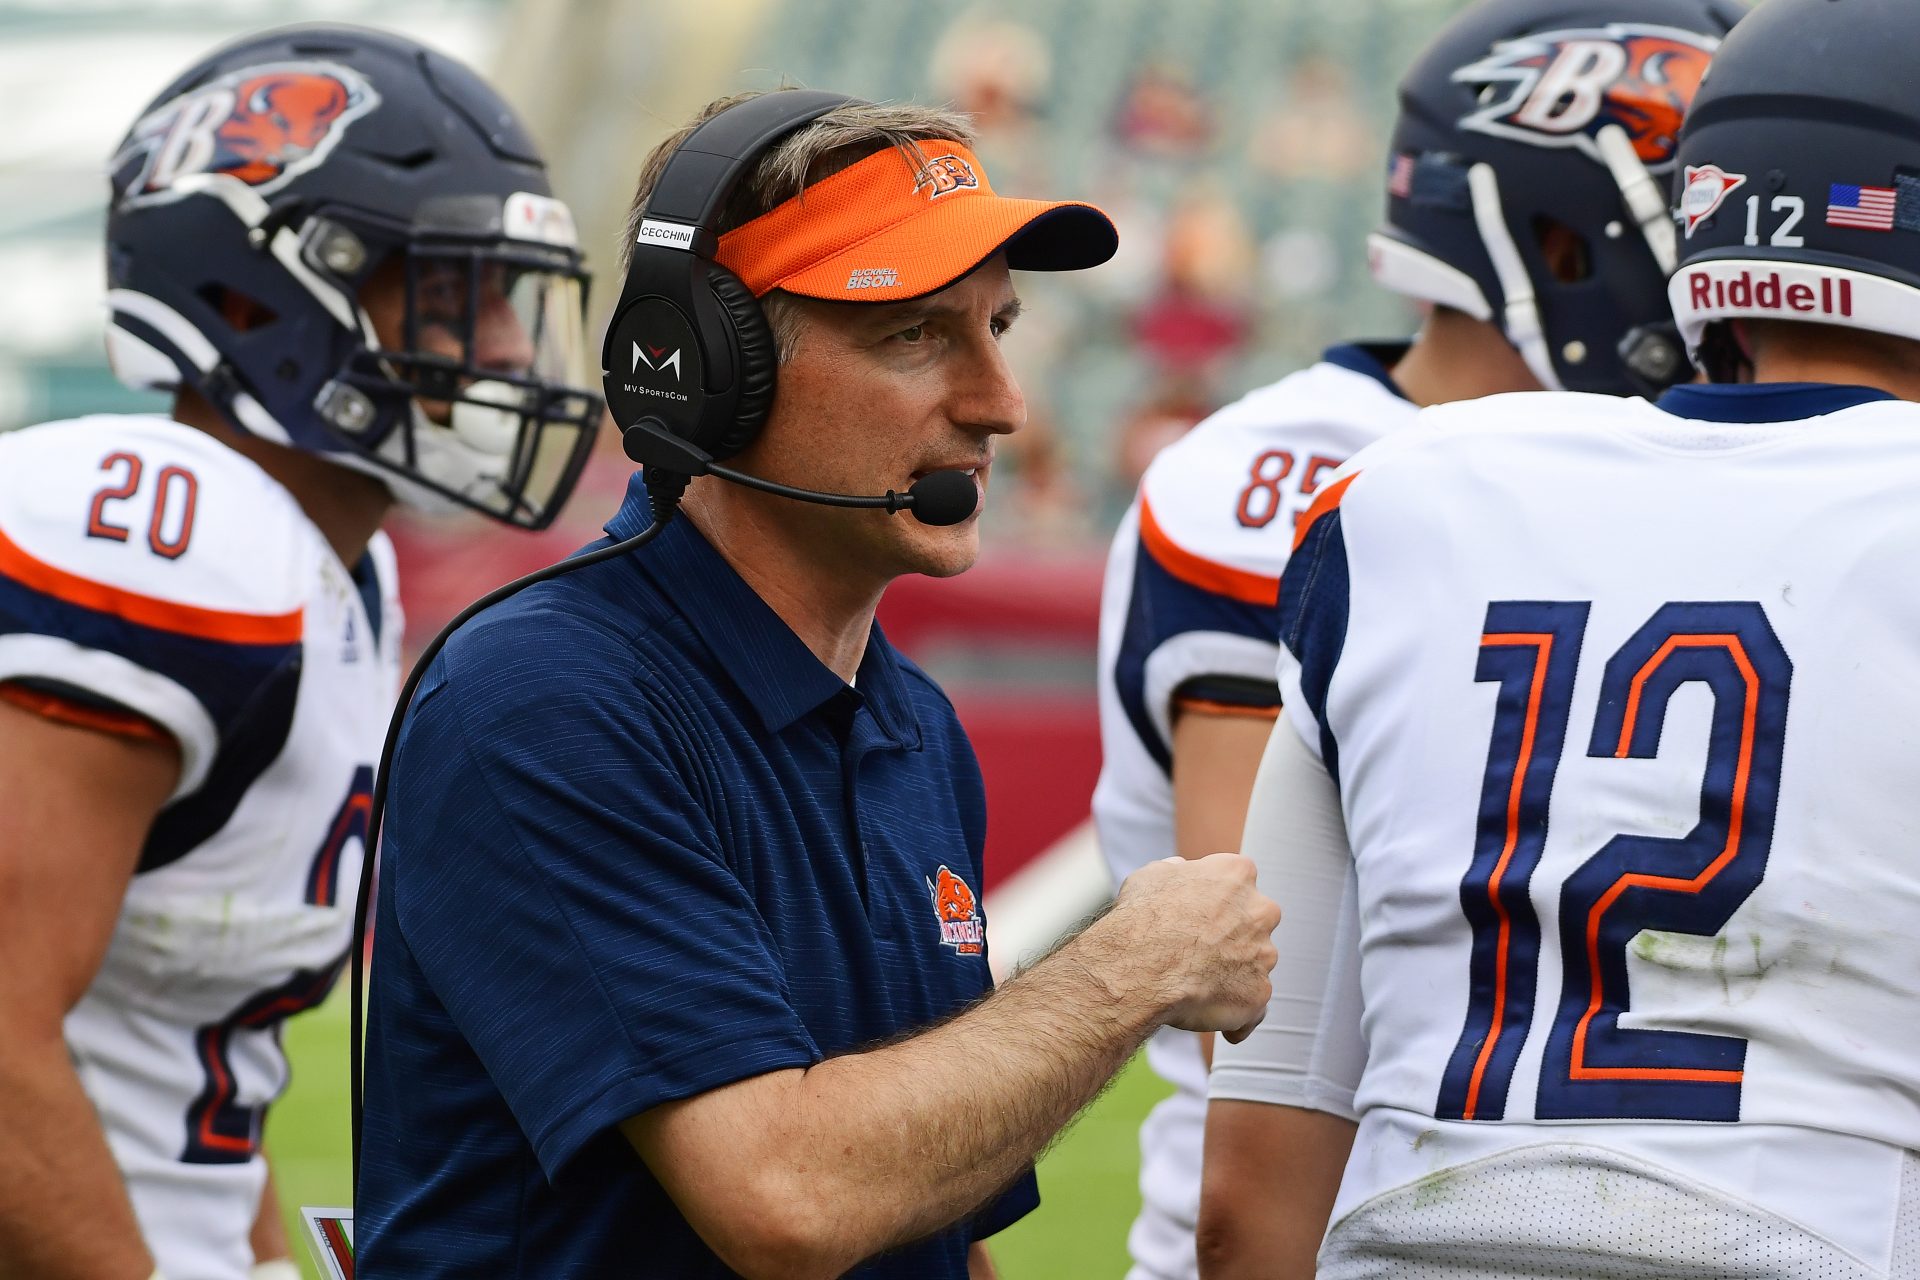 Bucknell Head Coach Dave Cecchini talks to his team during the fourth quarter of an NCAA football game against Temple at Lincoln Financial Field on Saturday, Aug. 31, 2019 in Philadelphia.